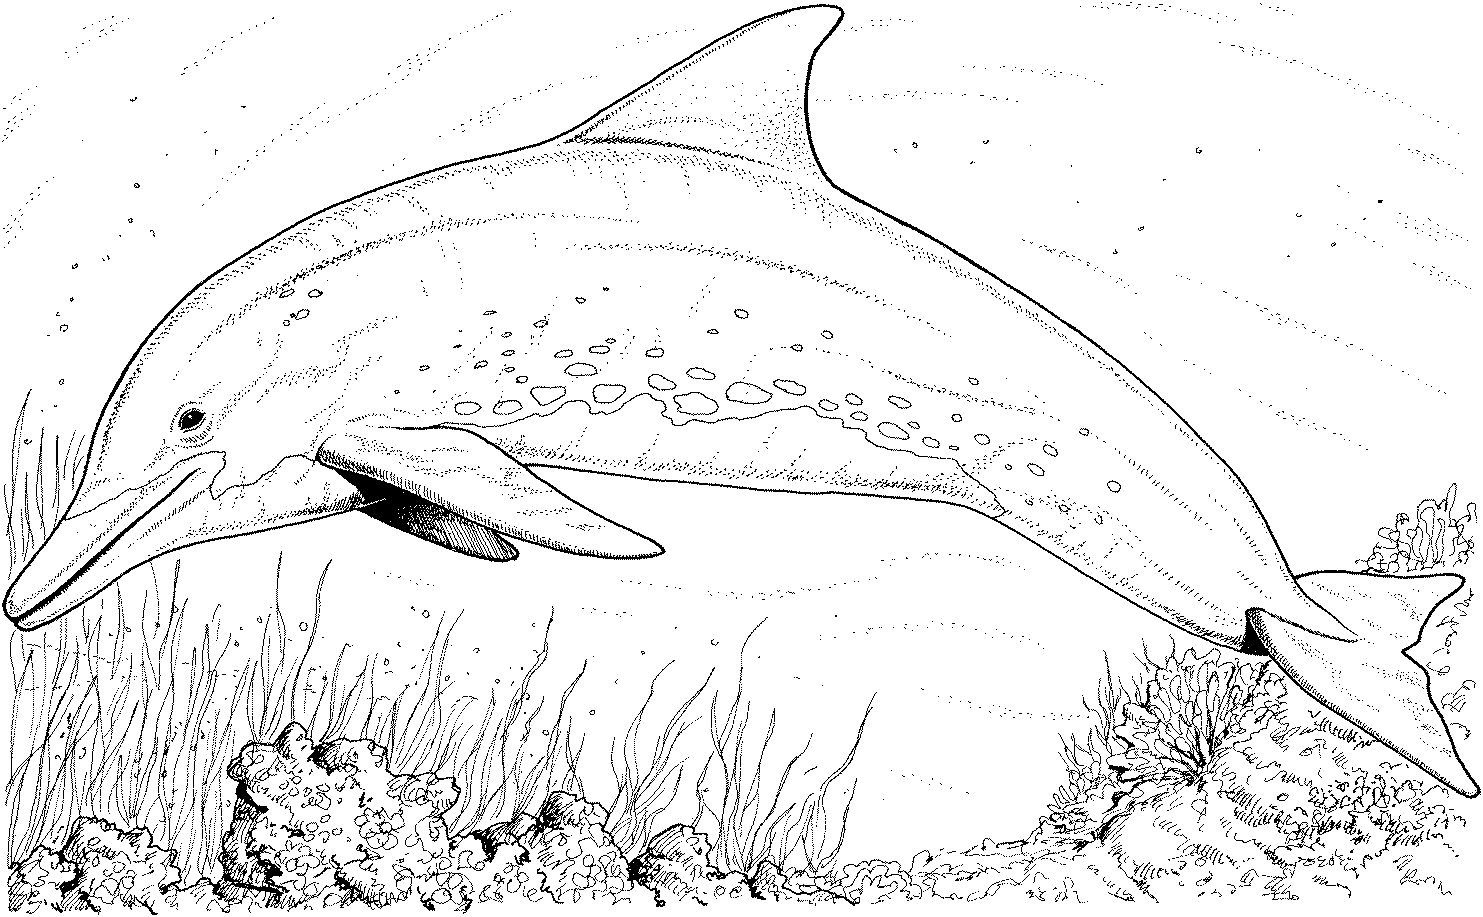 Bottlenose Dolphin Coloring Pages | Free Dolphin Coloring Pages - Dolphin Coloring Sheets Free Printable